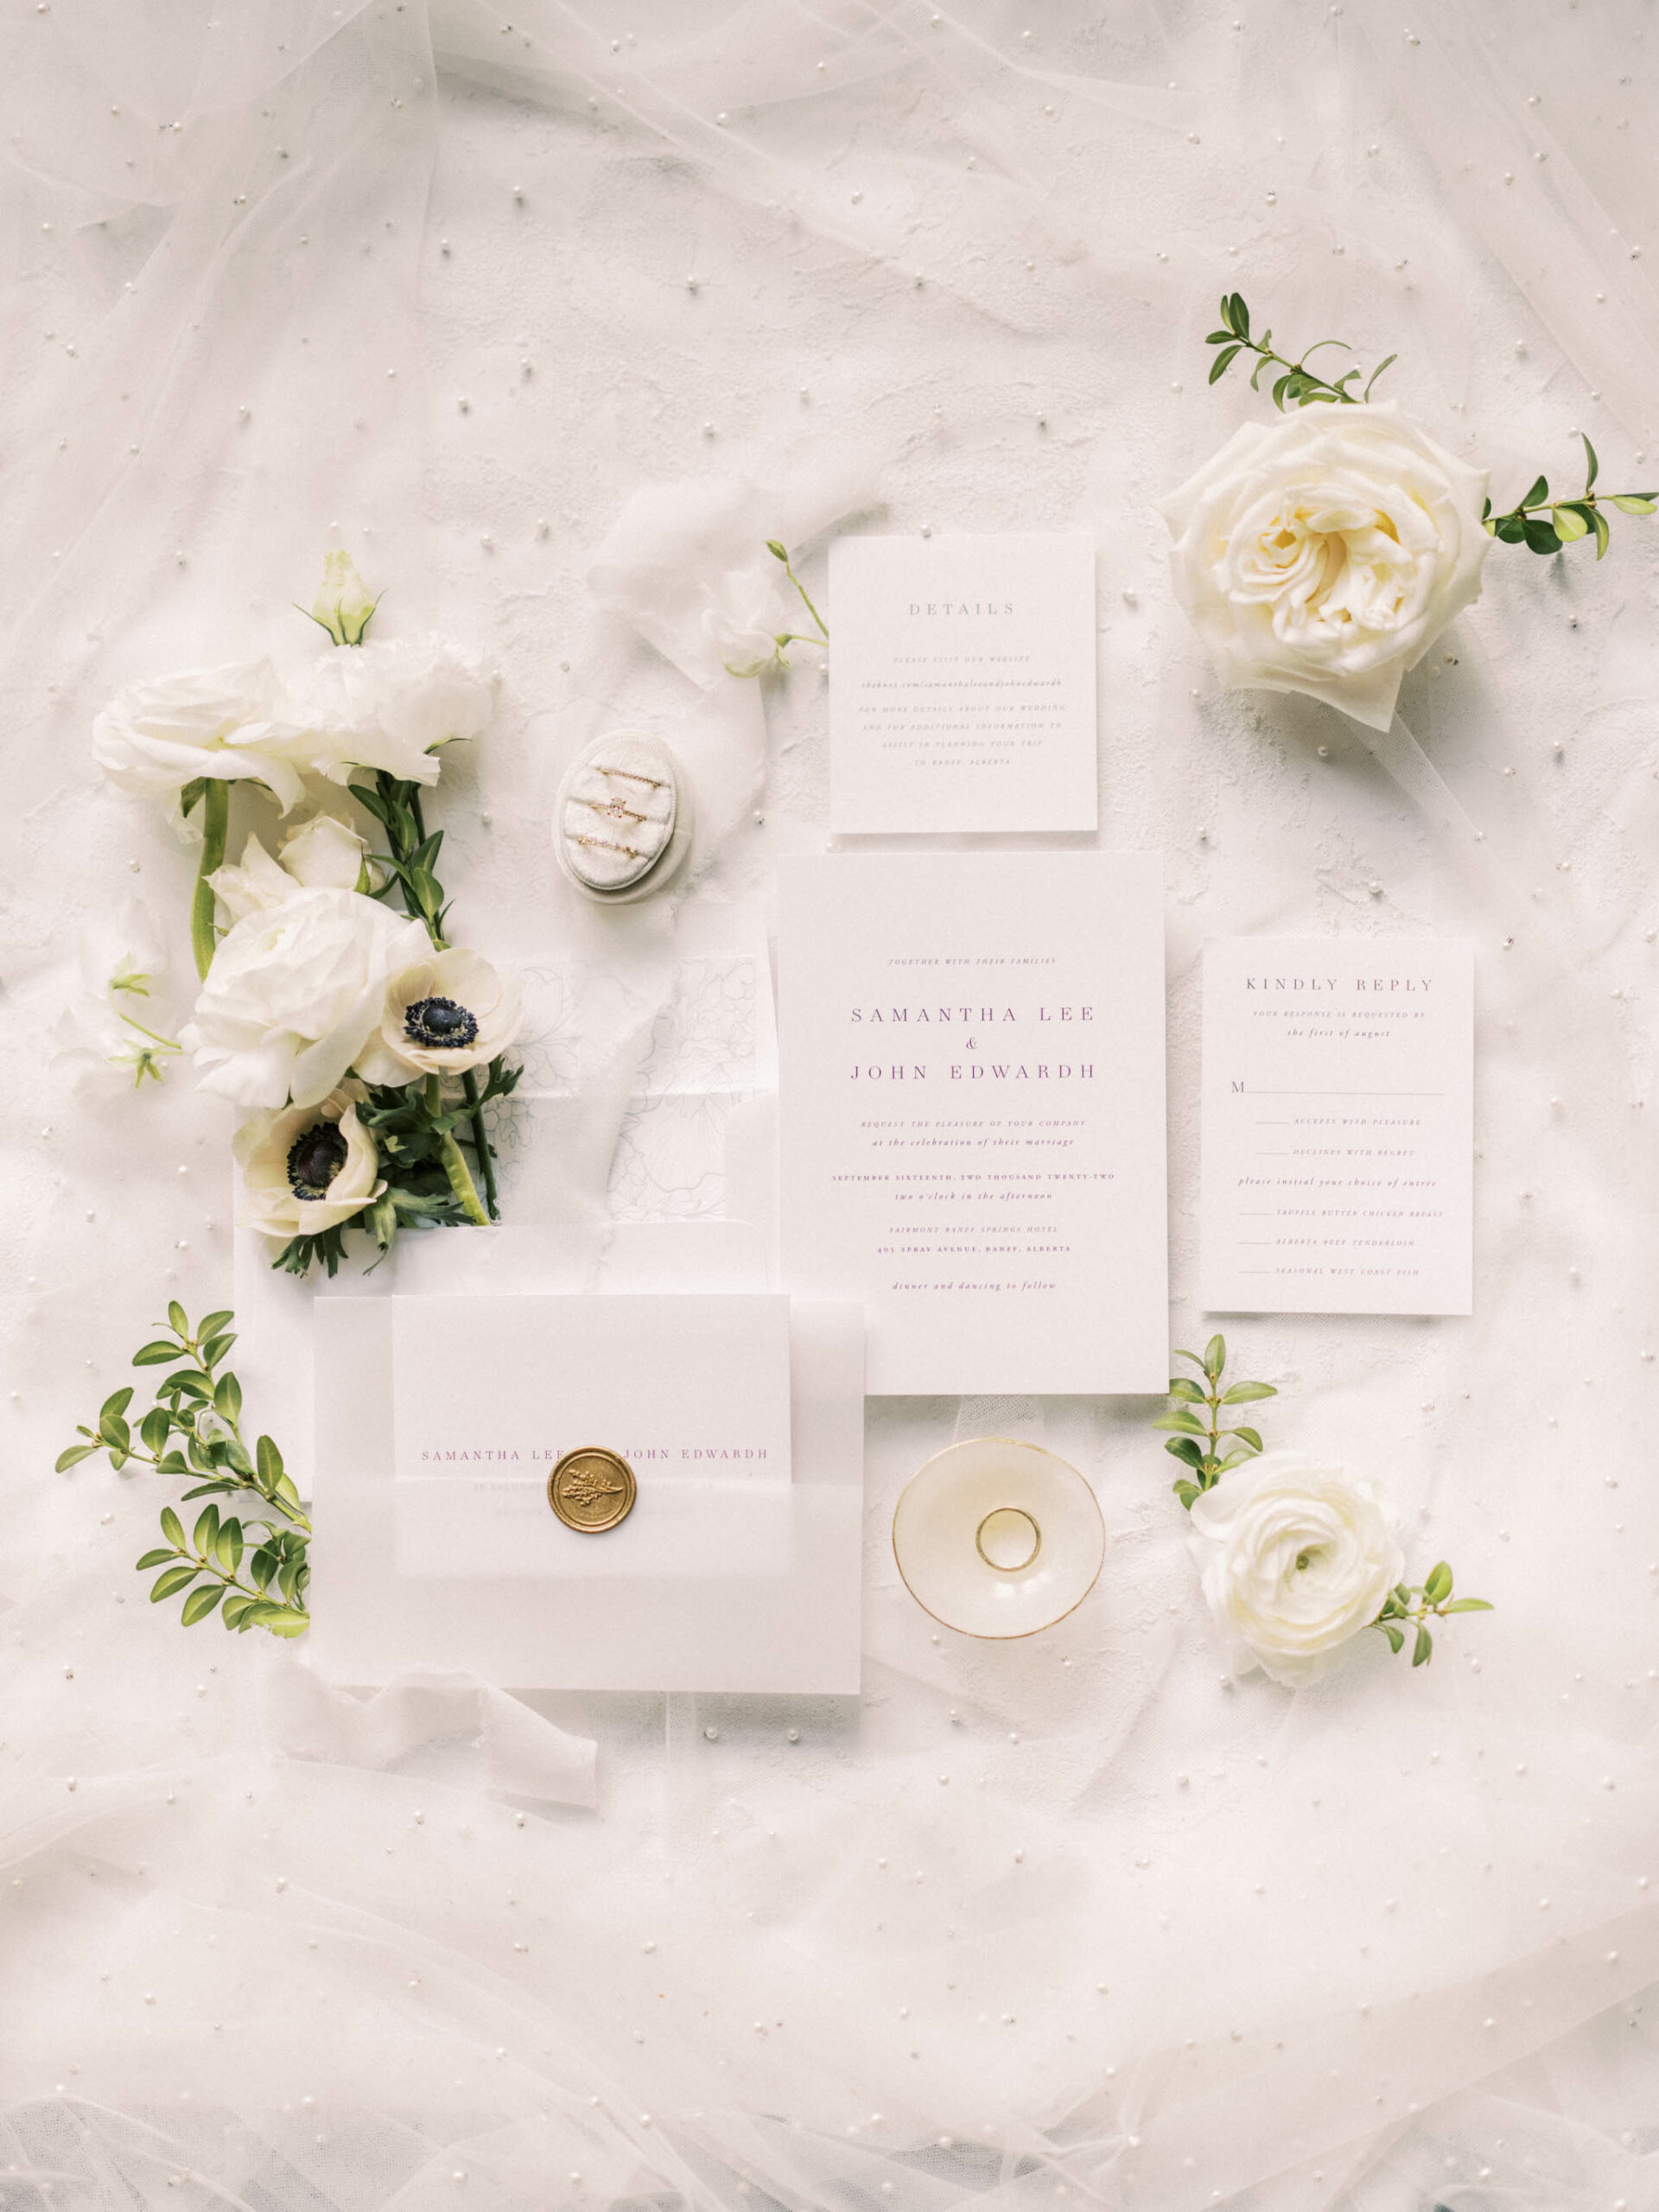 How to plan for detail photos on your wedding day, nicole sarah, flat lay, white invitation, invitation suite, invitation detail photography, floral flat lay, film wedding photographers, detail photos wedding